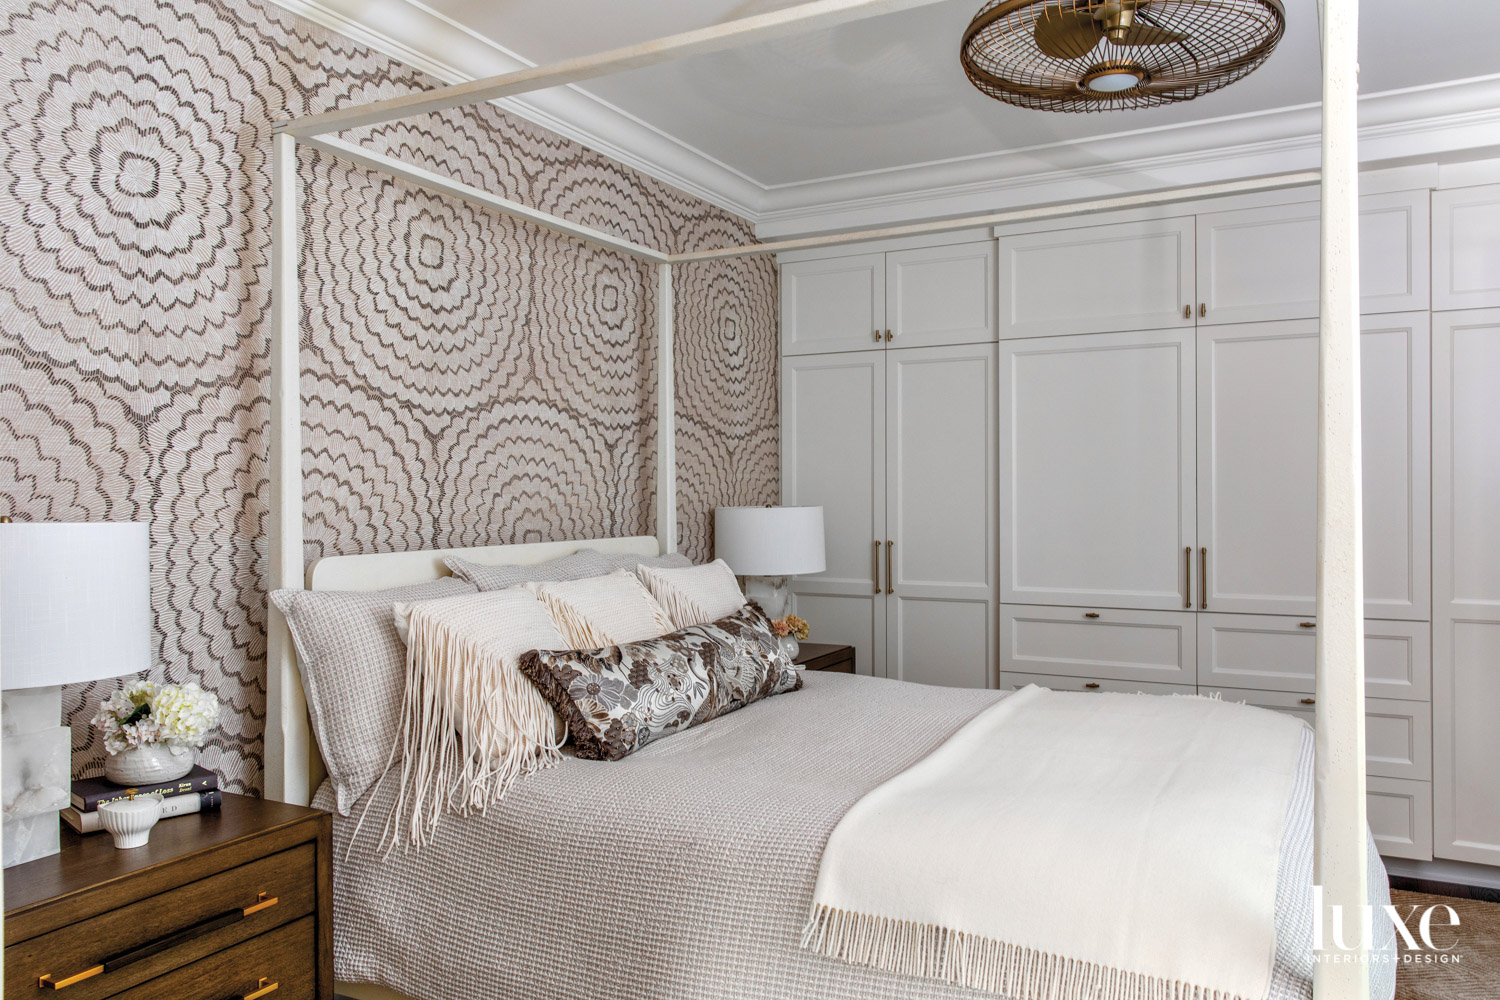 A guest bedroom features a...